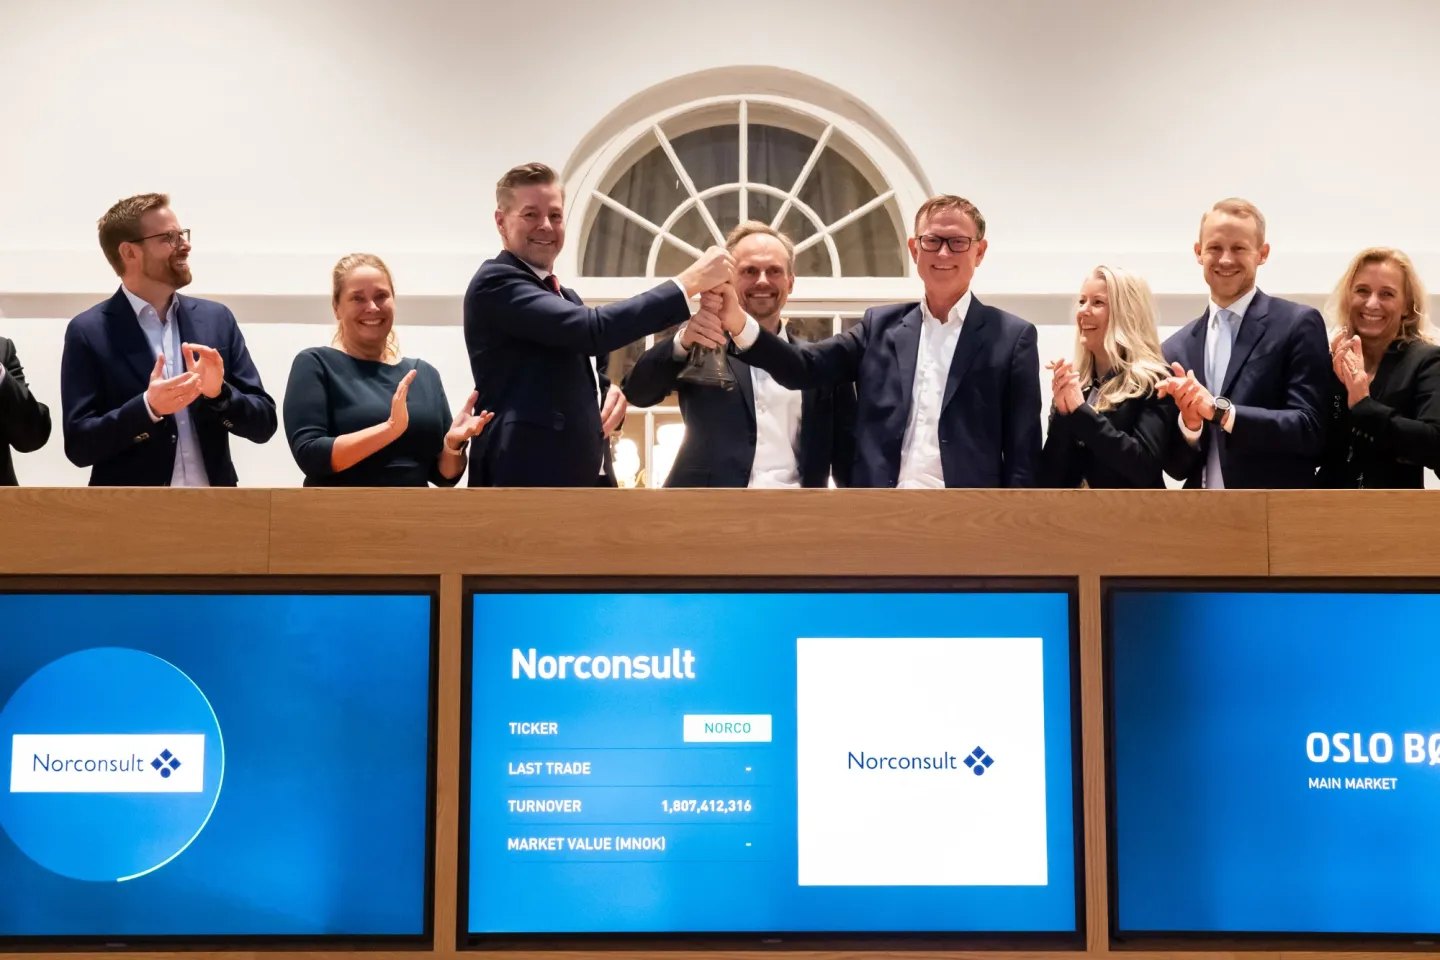  Egil Hogna, CEO of Norconsult, rang the bell this morning to celebrate the company’s listing on the Oslo Børs main market together with more than 100 of his colleagues from Norconsult who attended a breakfast at Oslo Børs. He was welcomed by Eirik Høiby Ausland, Head of Listing (Photo: Petter Berntsen/ NTB).